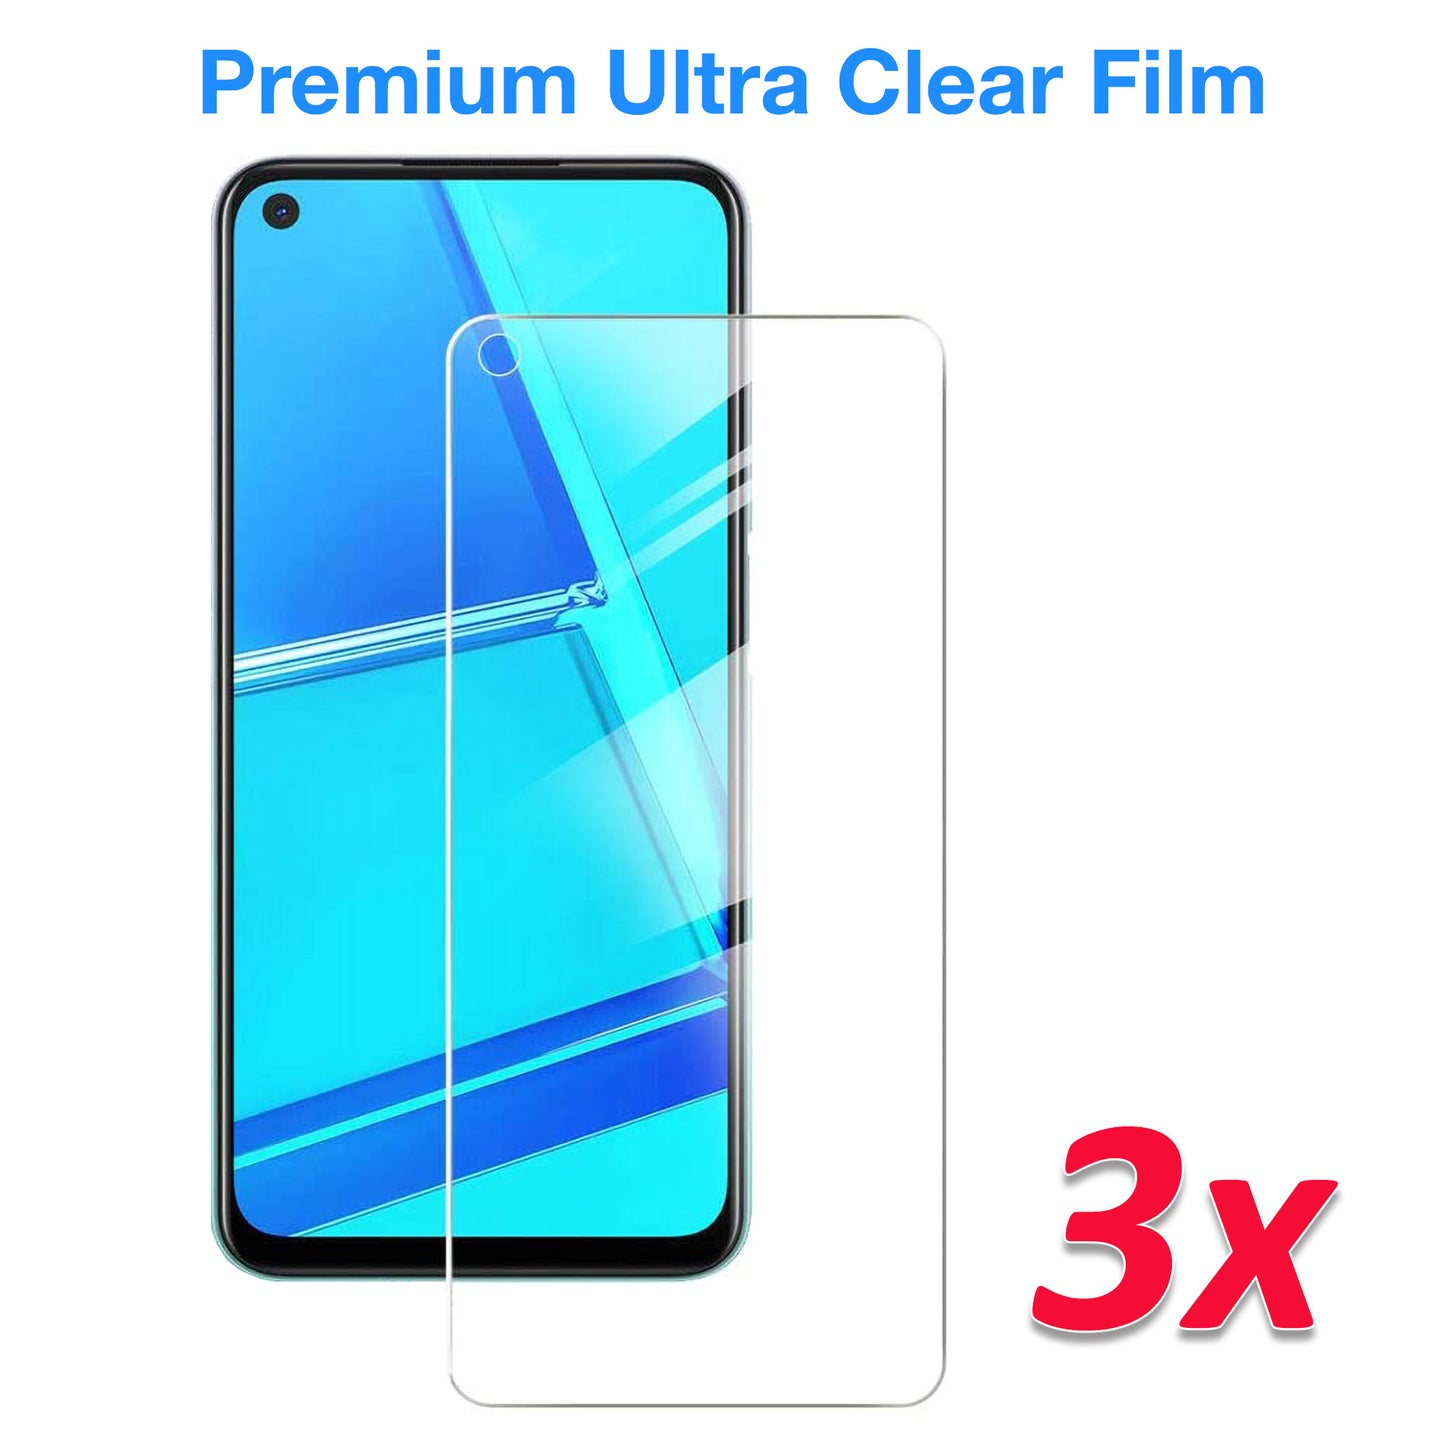 [3 Pack] MEZON OPPO A53s Ultra Clear Screen Protector Case Friendly Film (A53s, Clear)